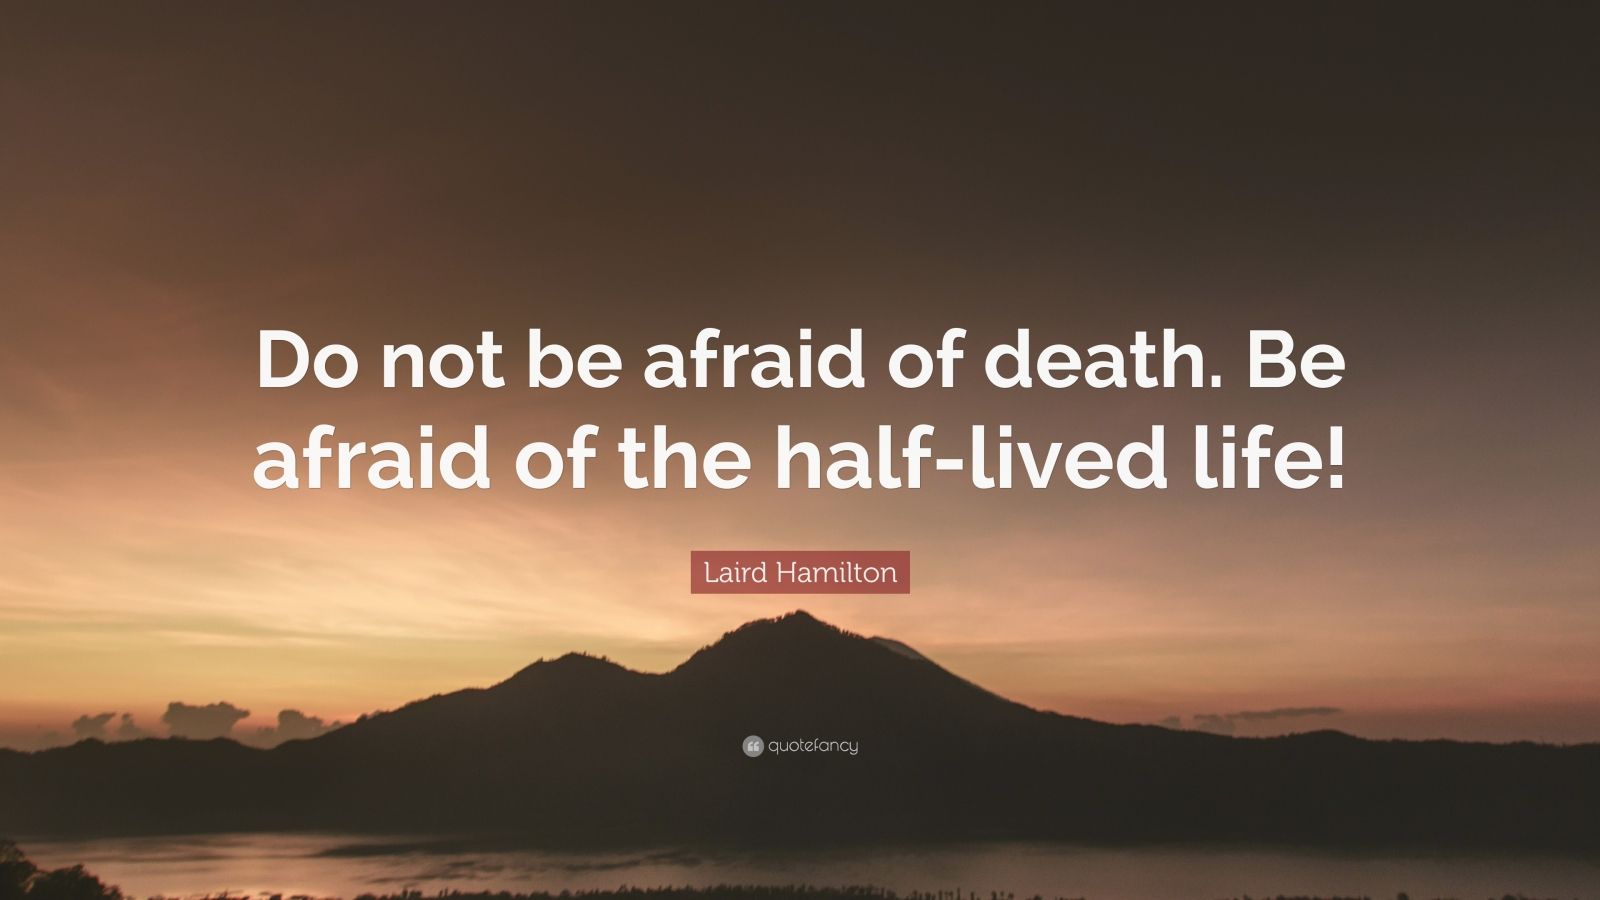 Laird Hamilton Quote: “Do not be afraid of death. Be afraid of the half ...